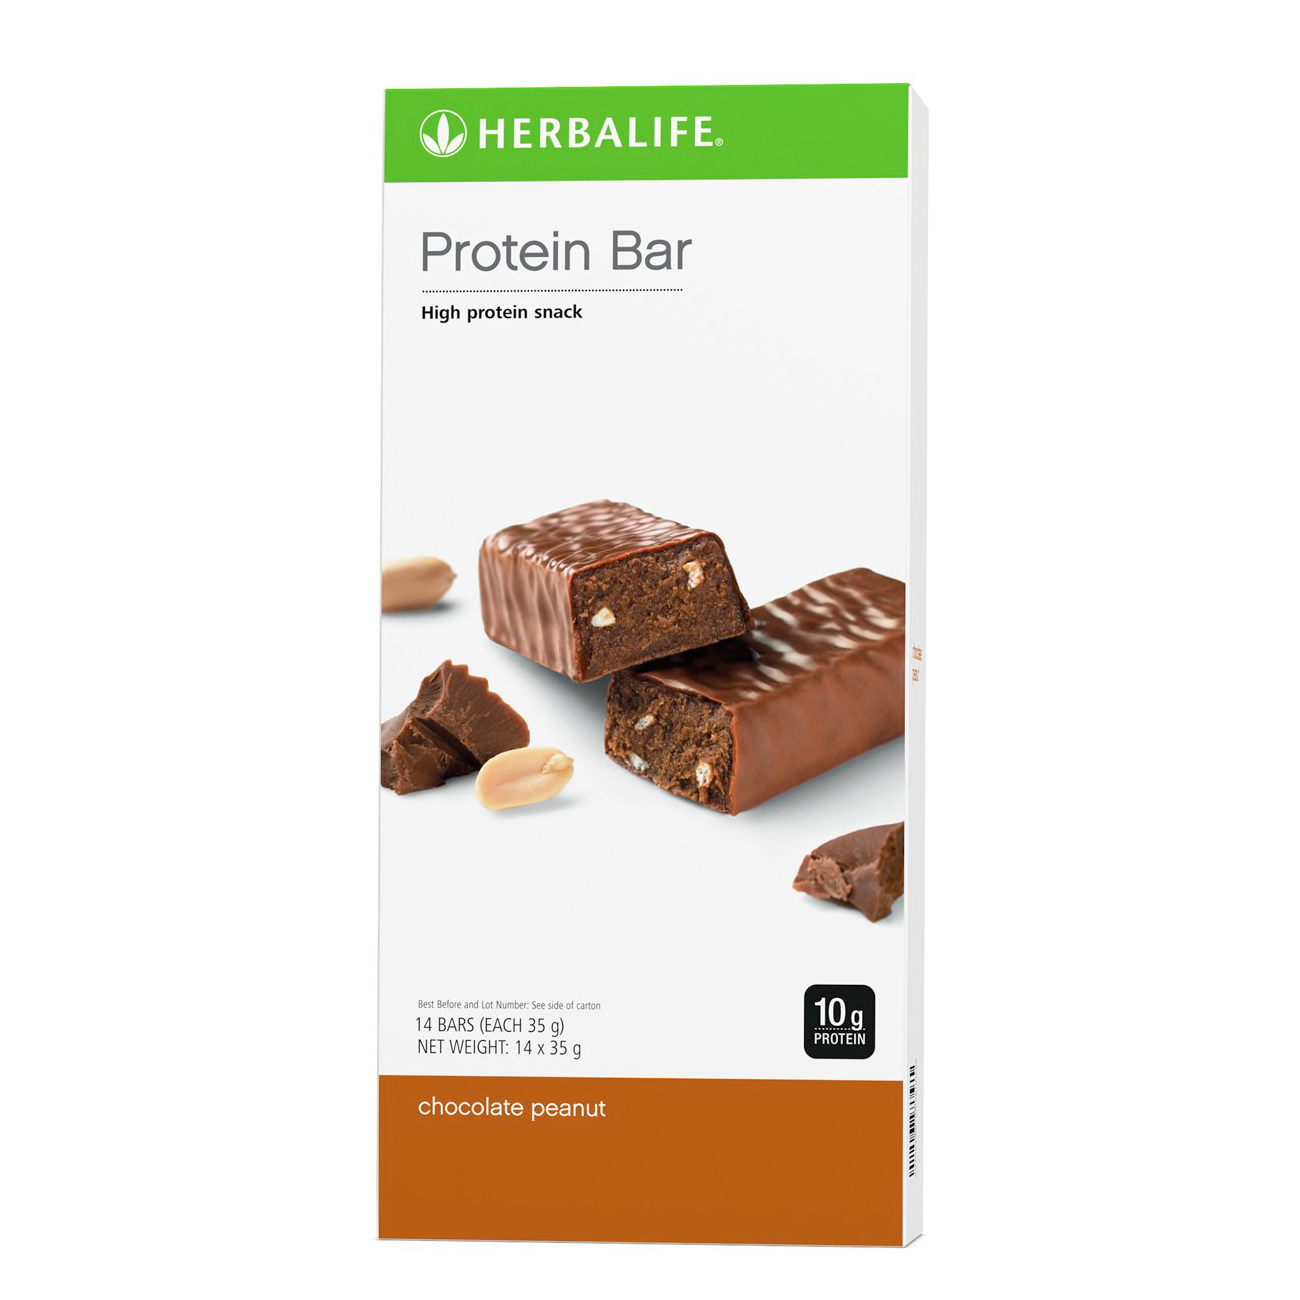 Protein Bars  Chocolate Peanut Flavoured product shot